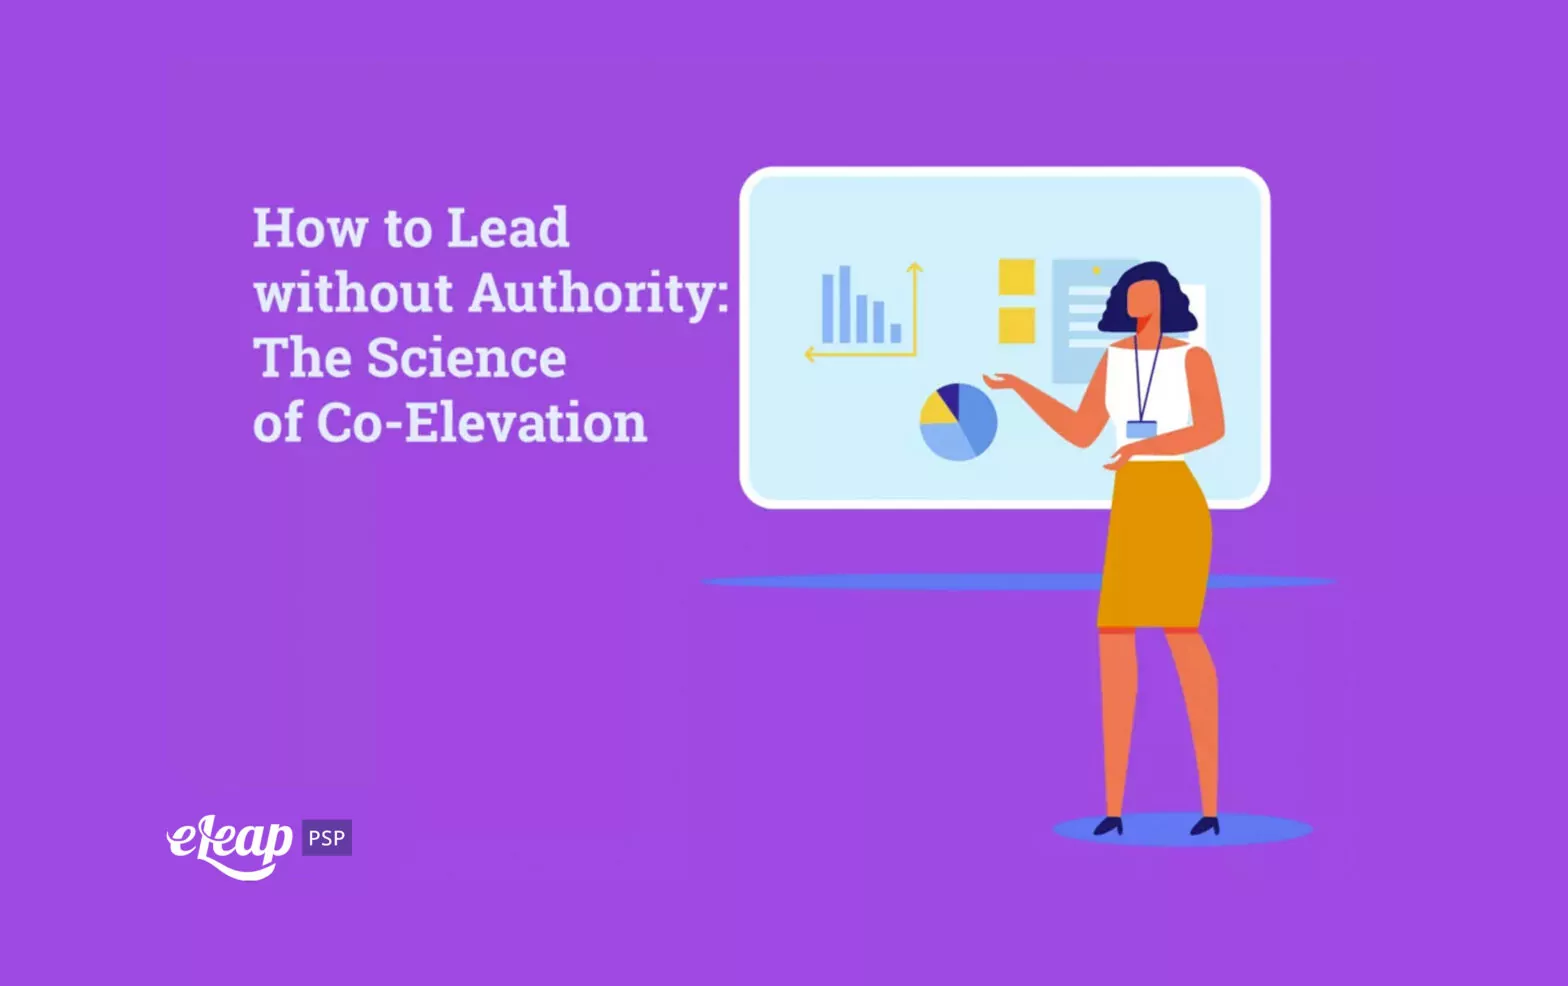 How to Lead without Authority: The Science of Co-Elevation